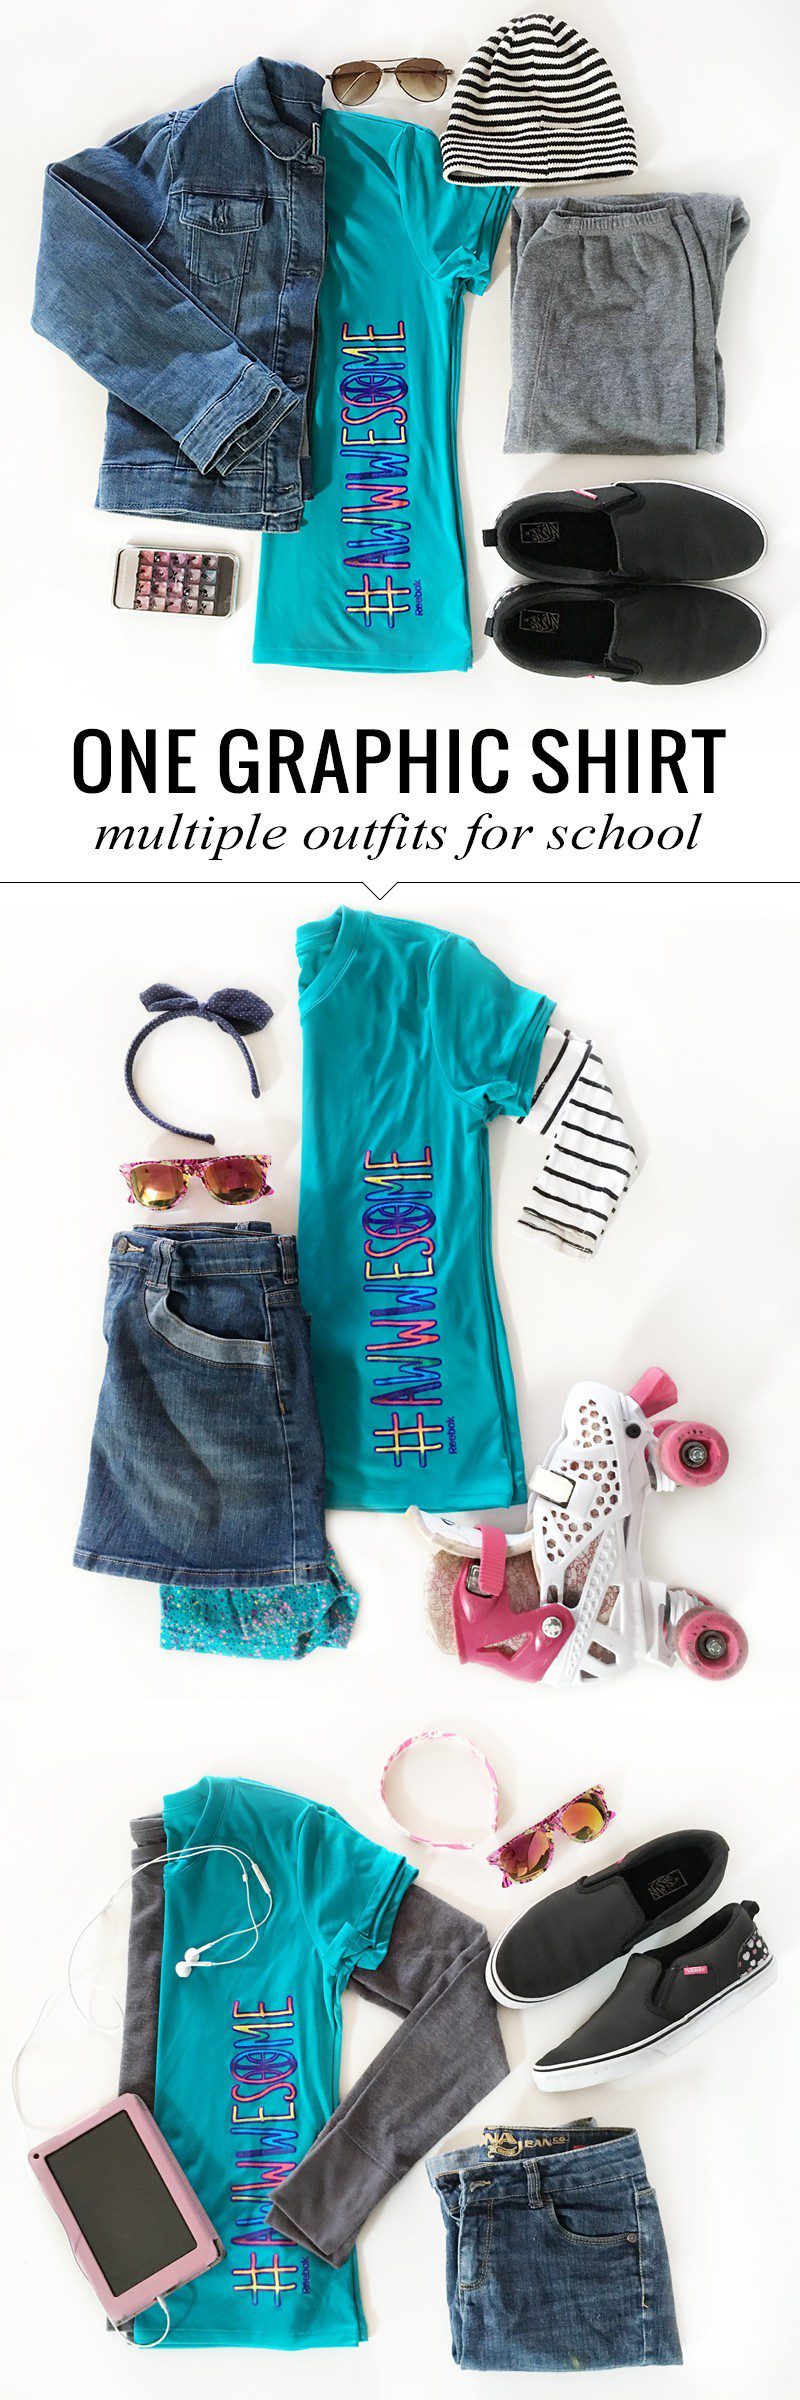 Back to School Shopping- 5 Tips to a Killer Wardrobe and multiple school looks with a single graphic tee for girls